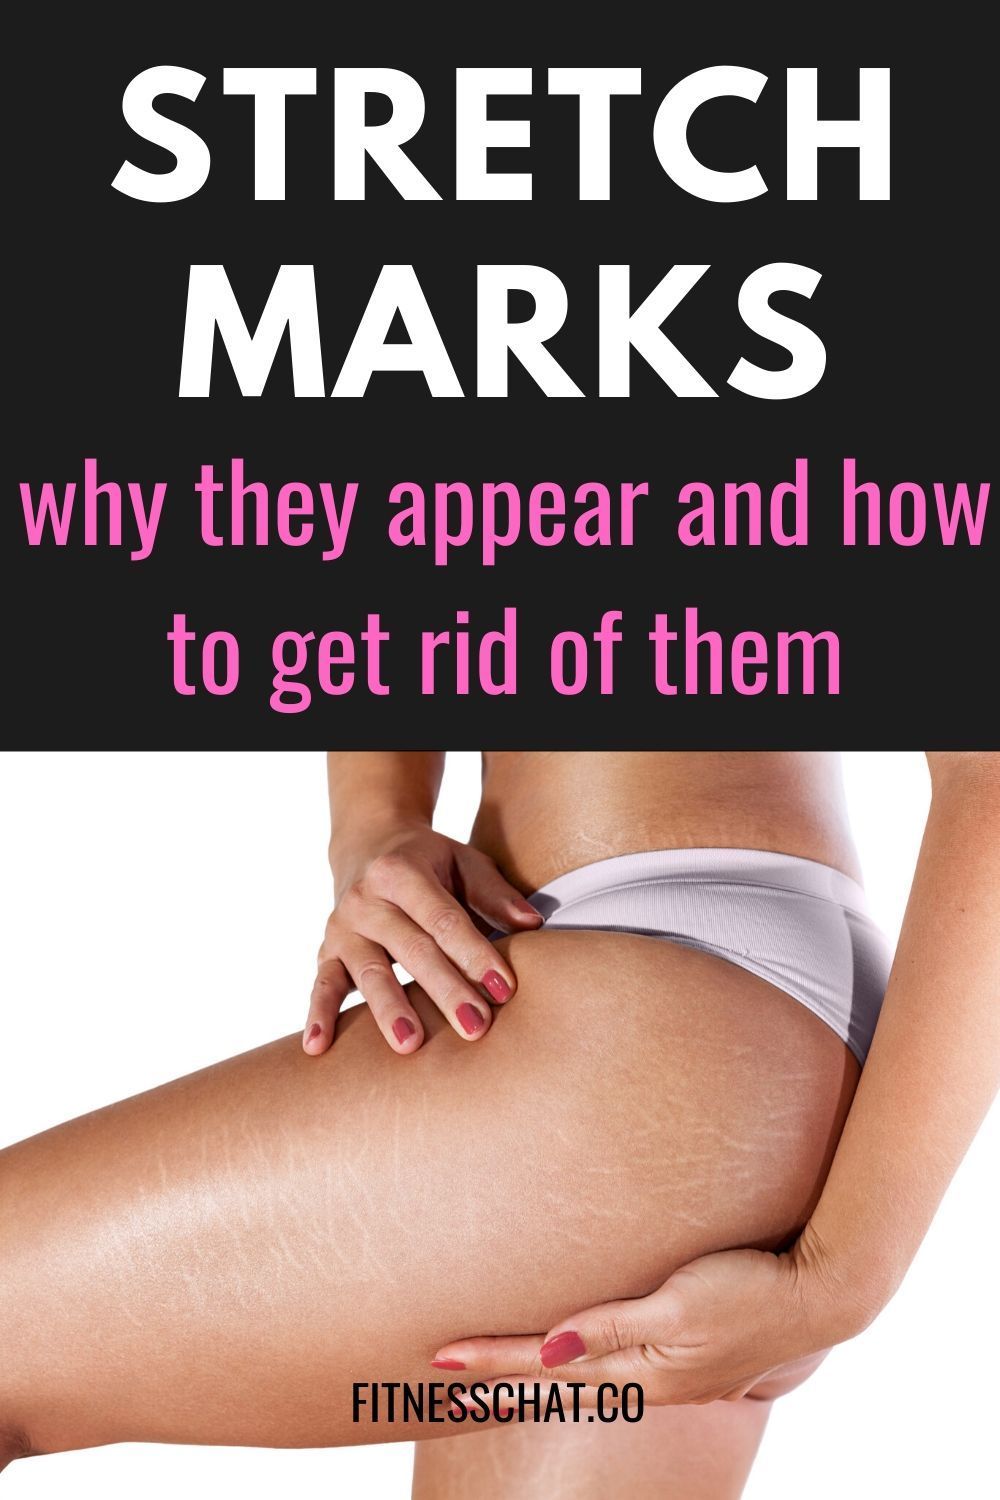 3 Best Ways To Get Rid Of Stretch Marks -   17 how to get rid of stretch marks ideas